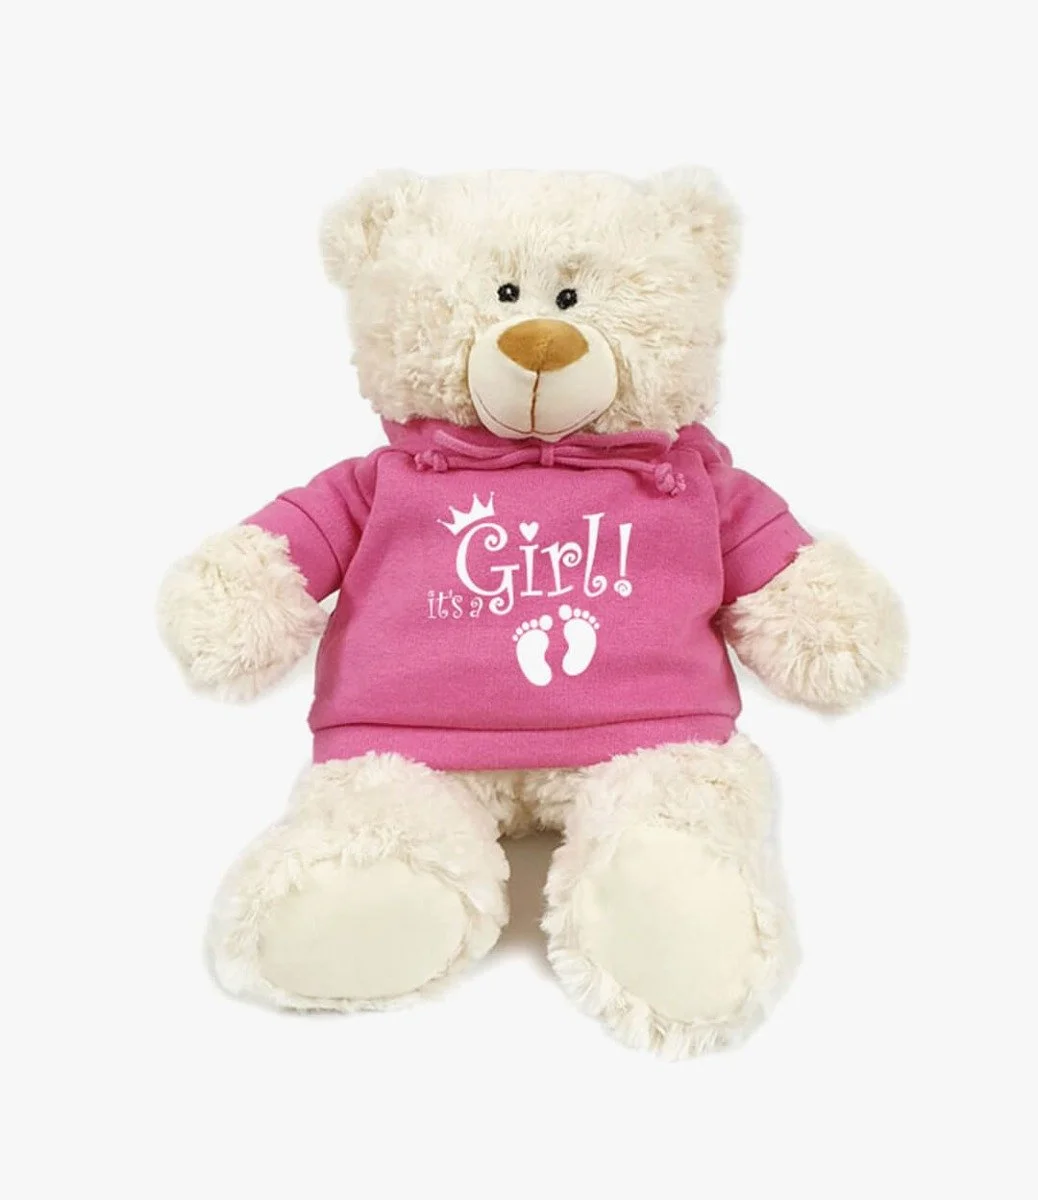 Cream Bear in Pink Hoodie "It's a Girl!" by Fay Lawson